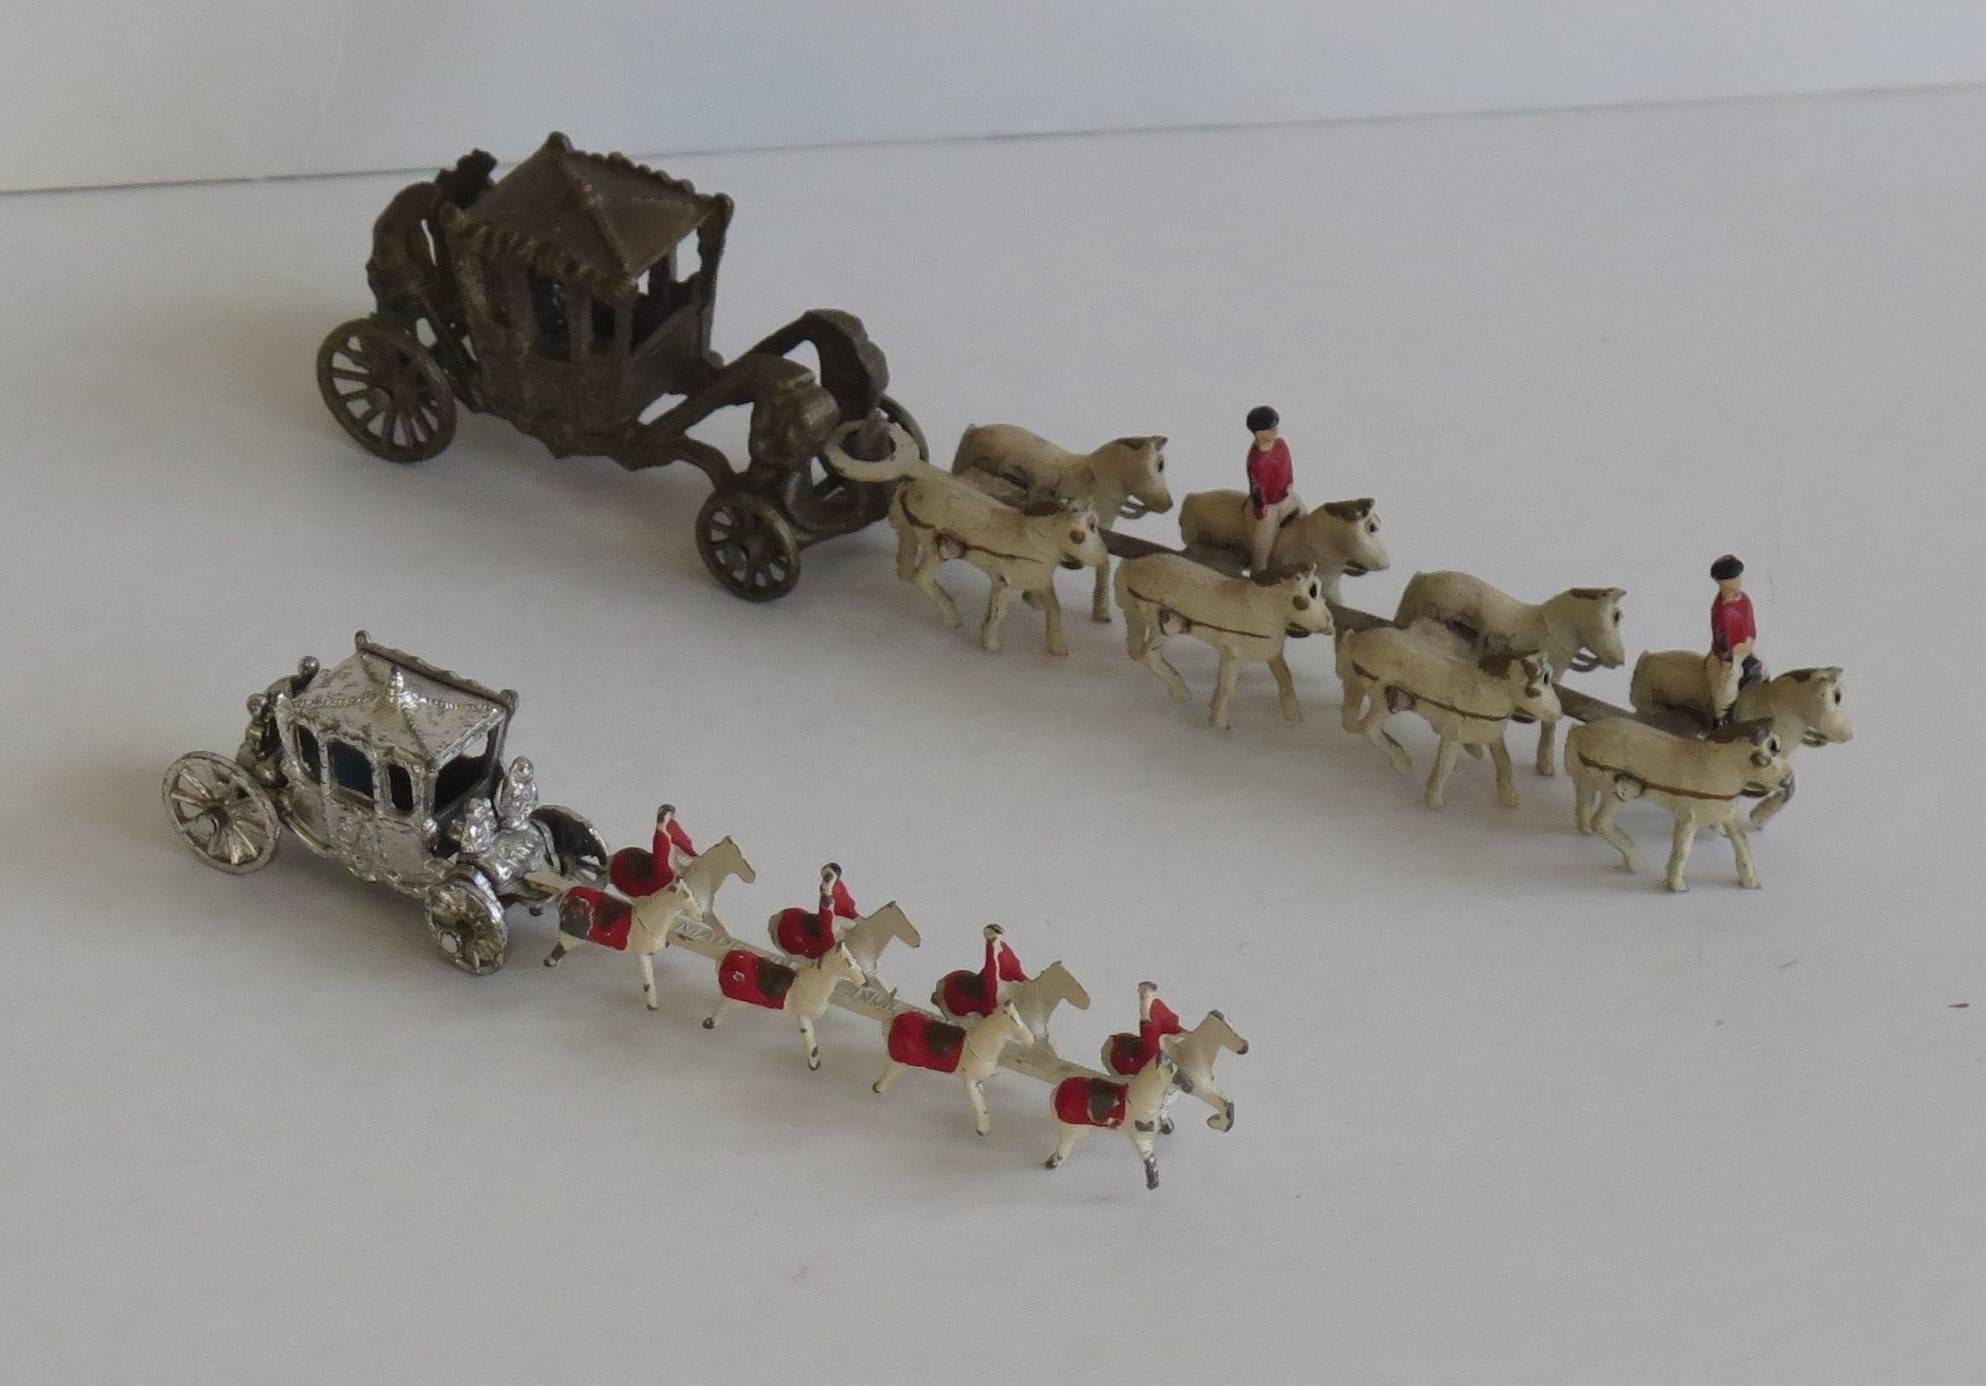 These are two different commemorative models or toys made for the Coronation of Queen Elizabeth II, in 1953.

Both models show the royal carriage being drawn by a team of eight horses. The wheels turn on each carriage and the horse section hooks